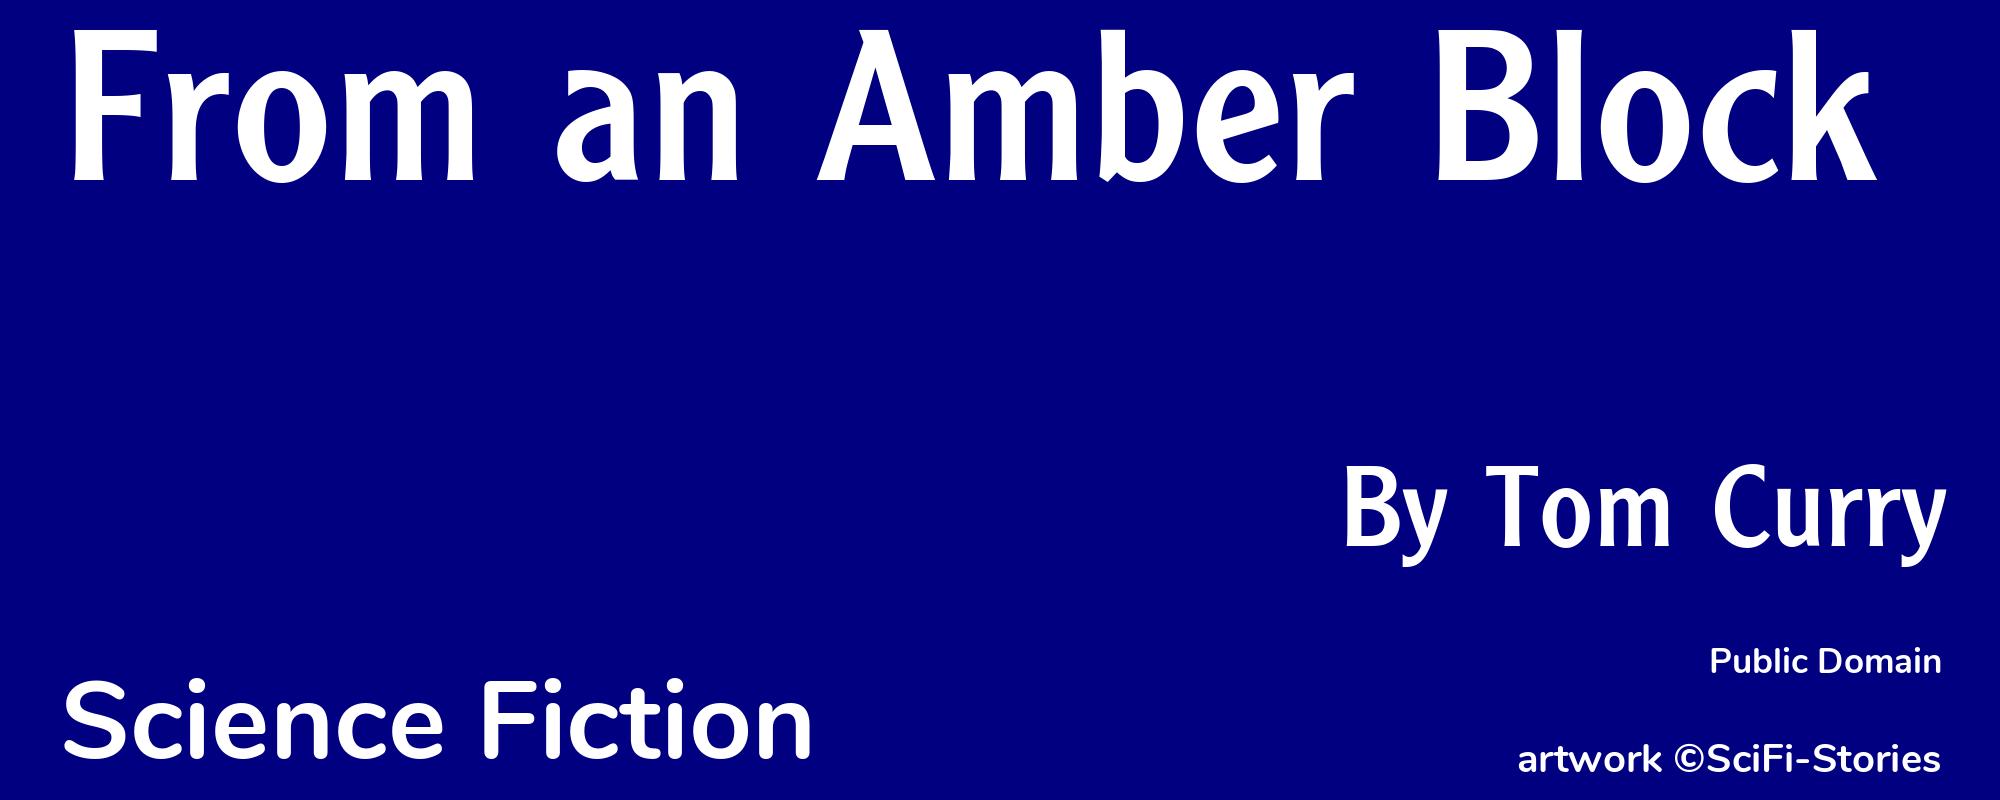 From an Amber Block - Cover